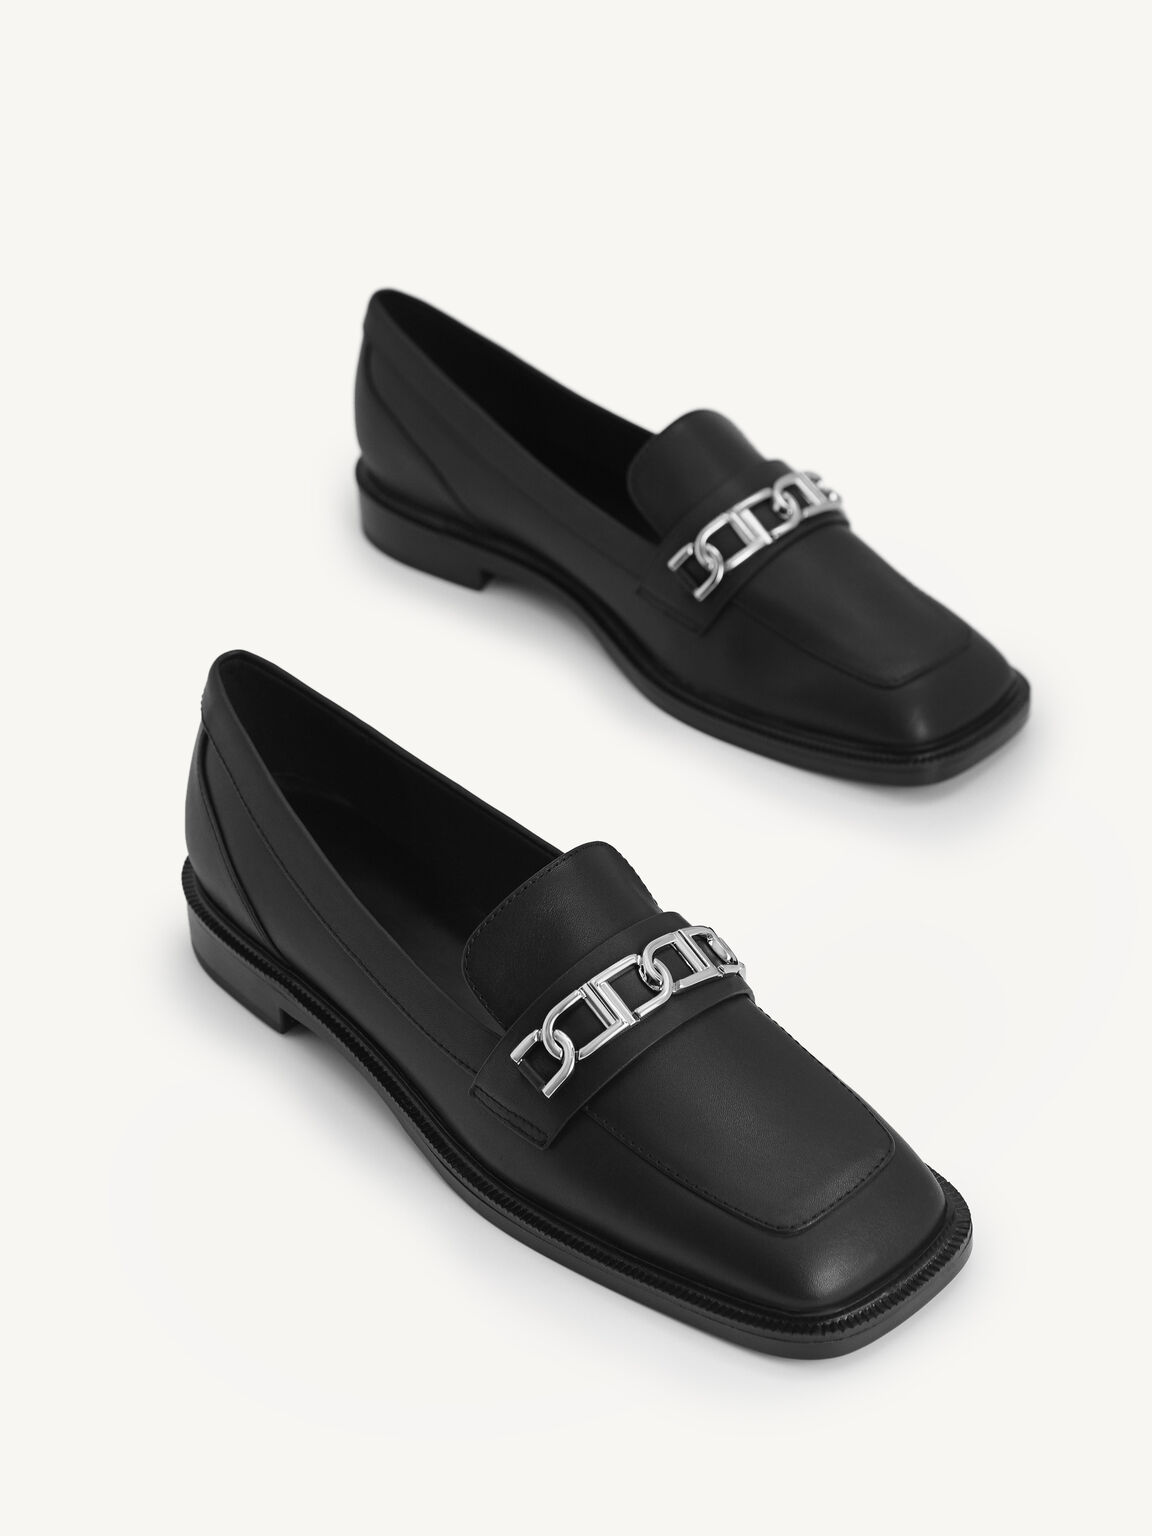 Icon Leather Square Toe Loafers, Black, hi-res